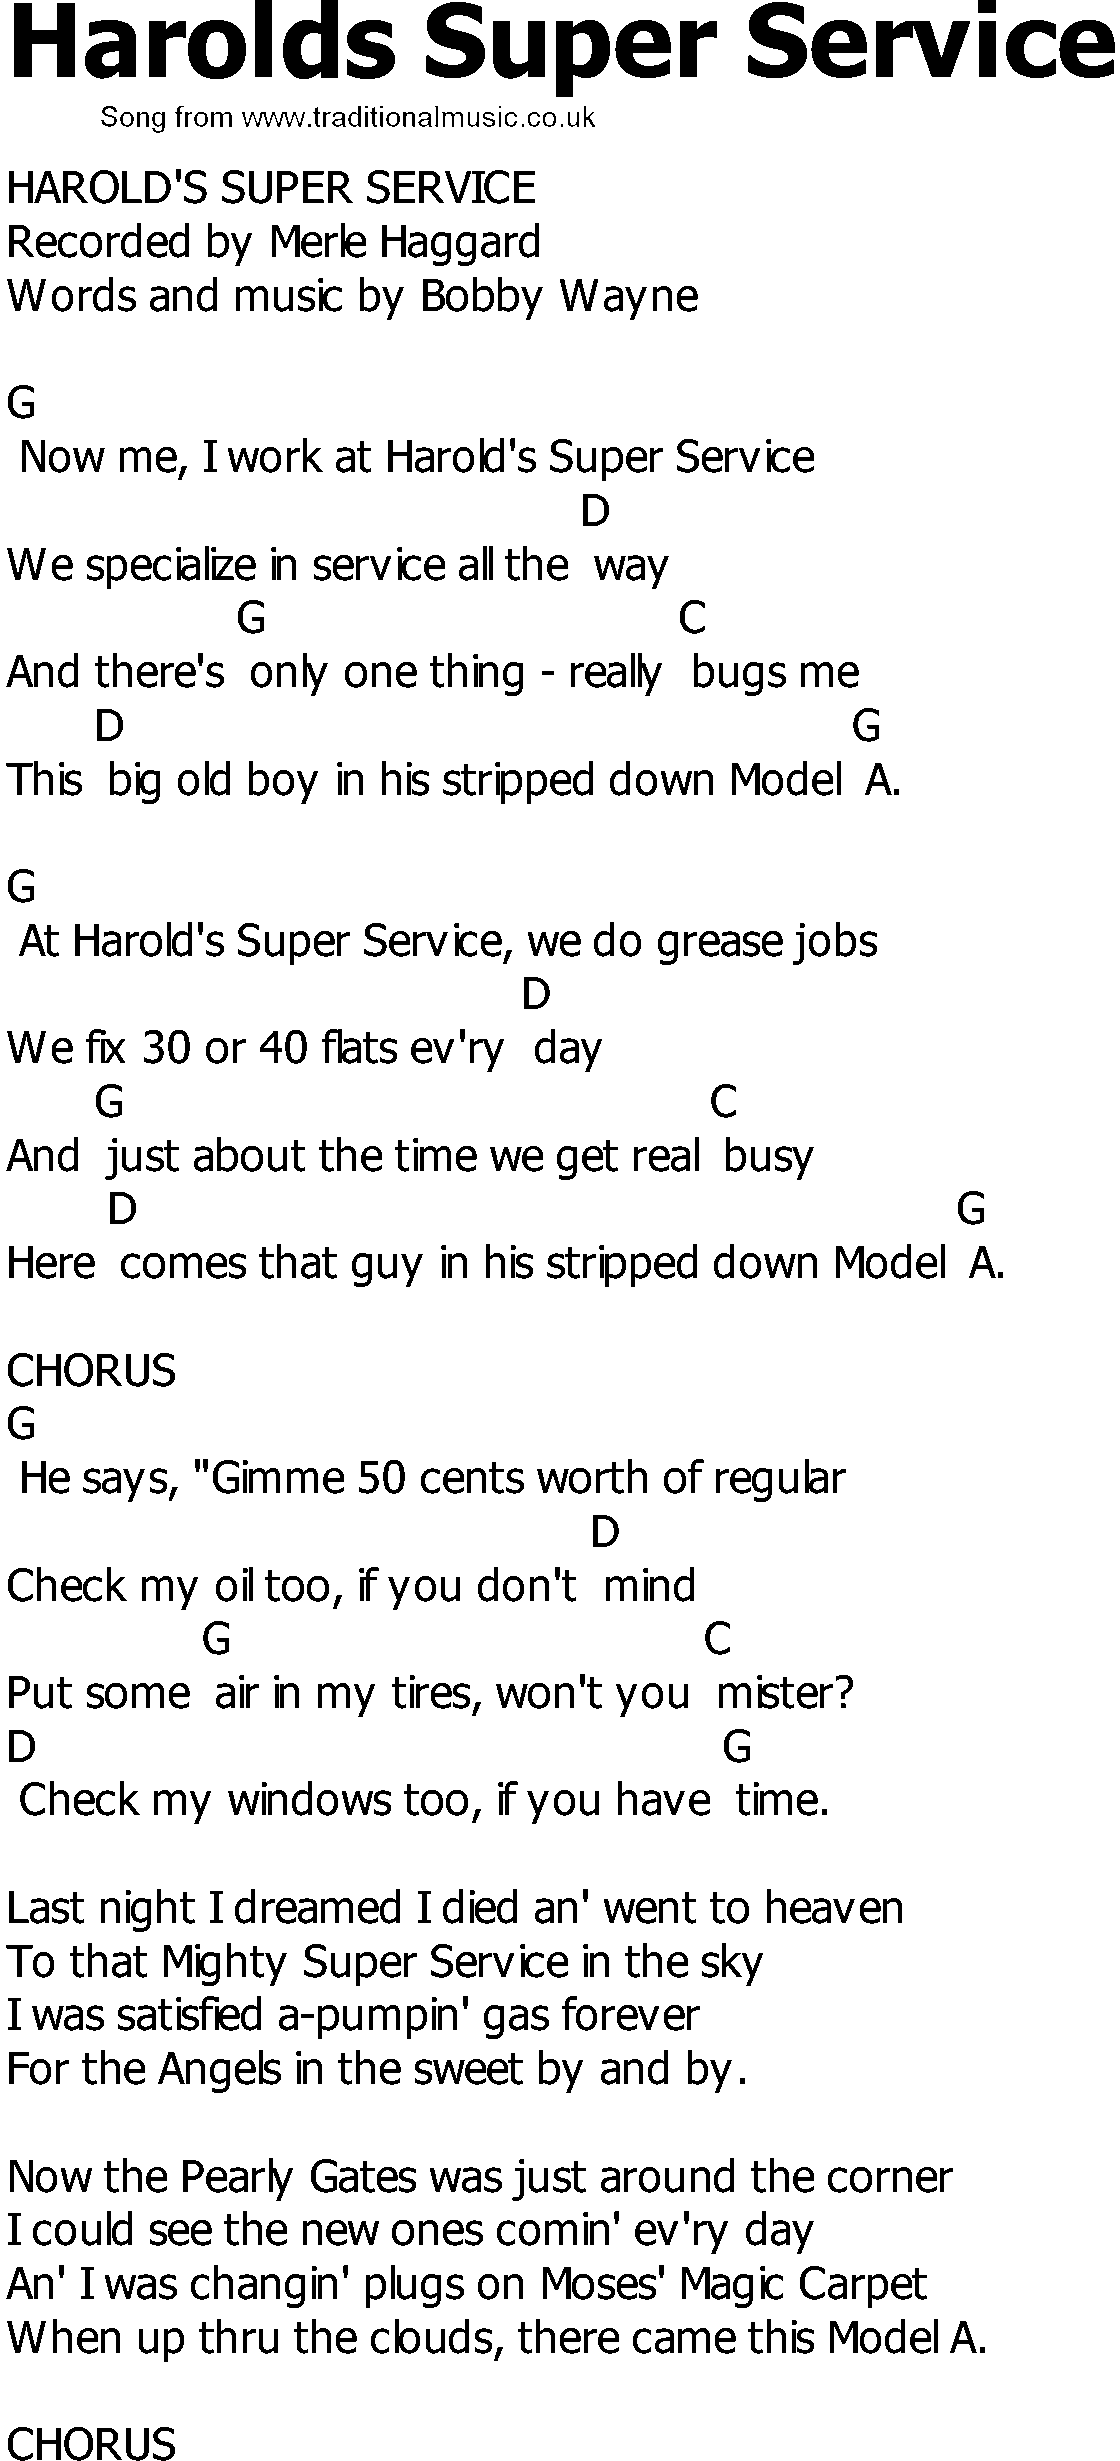 Old Country song lyrics with chords - Harolds Super Service